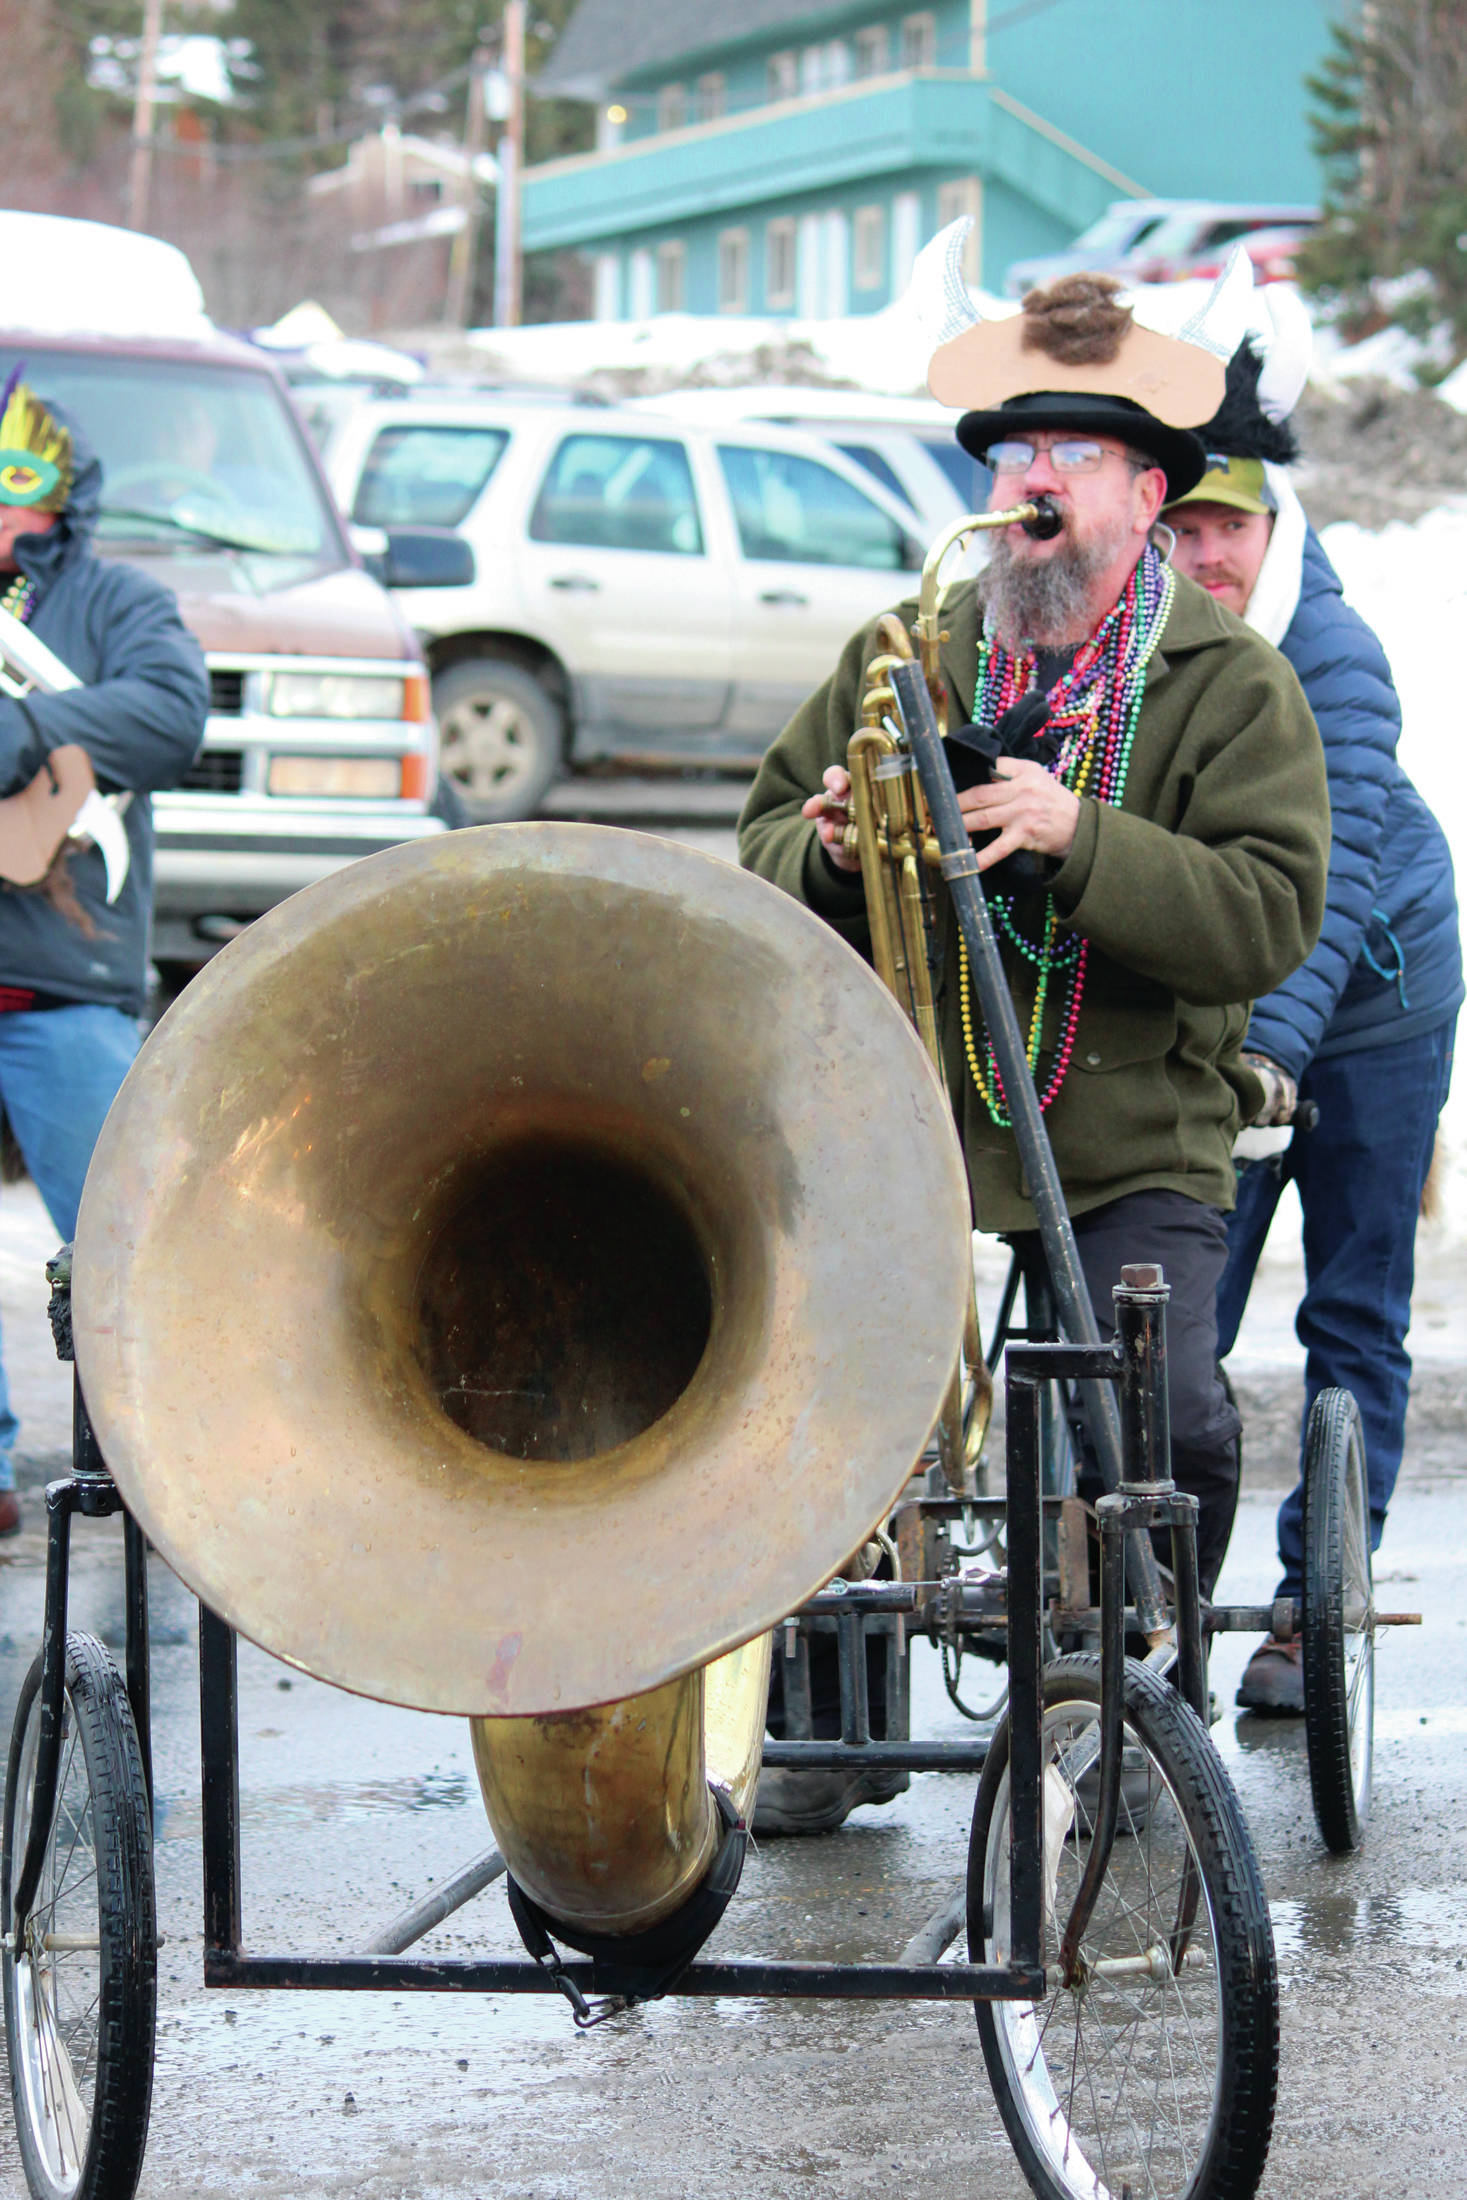 Photo by Megan Pacer/Homer News 
A parade participant plays a bike horn with the Krewe of Gambrinus float during this year’s Homer Winter Carnival Parade on Saturday, Feb. 8, 2020 in Homer, Alaska.